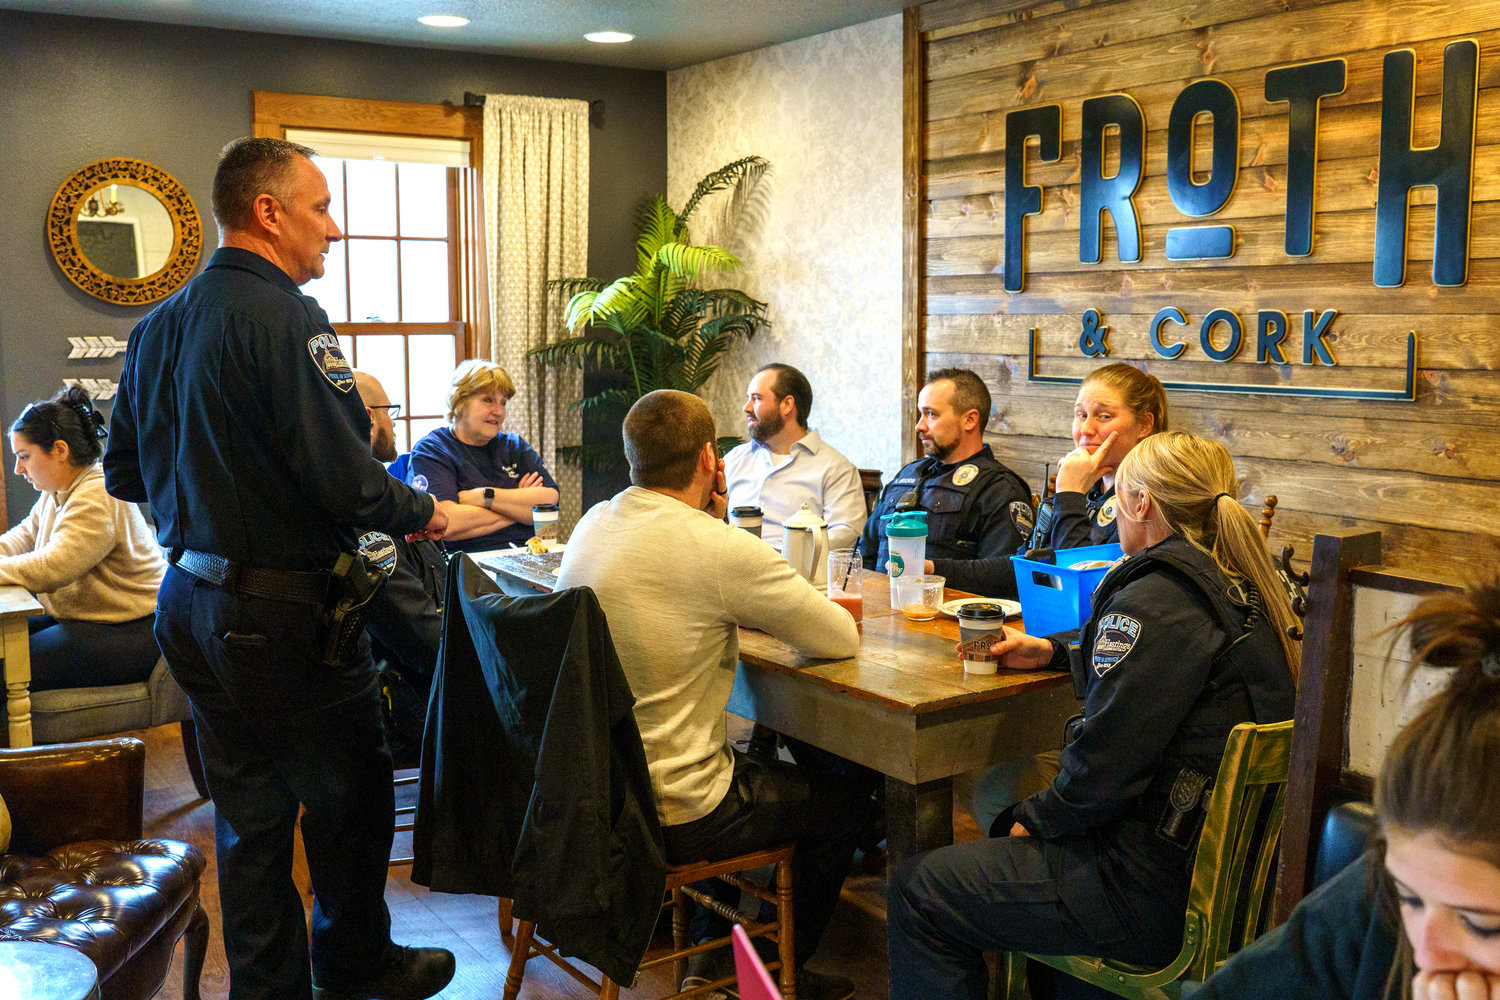 The second floor of Froth and Cork was packed for Coffee with a Cop Day in Hastings. Residents had the opportunity to hang with the officers from Hastings Police Department for simple conversation and their favorite morning beverage.